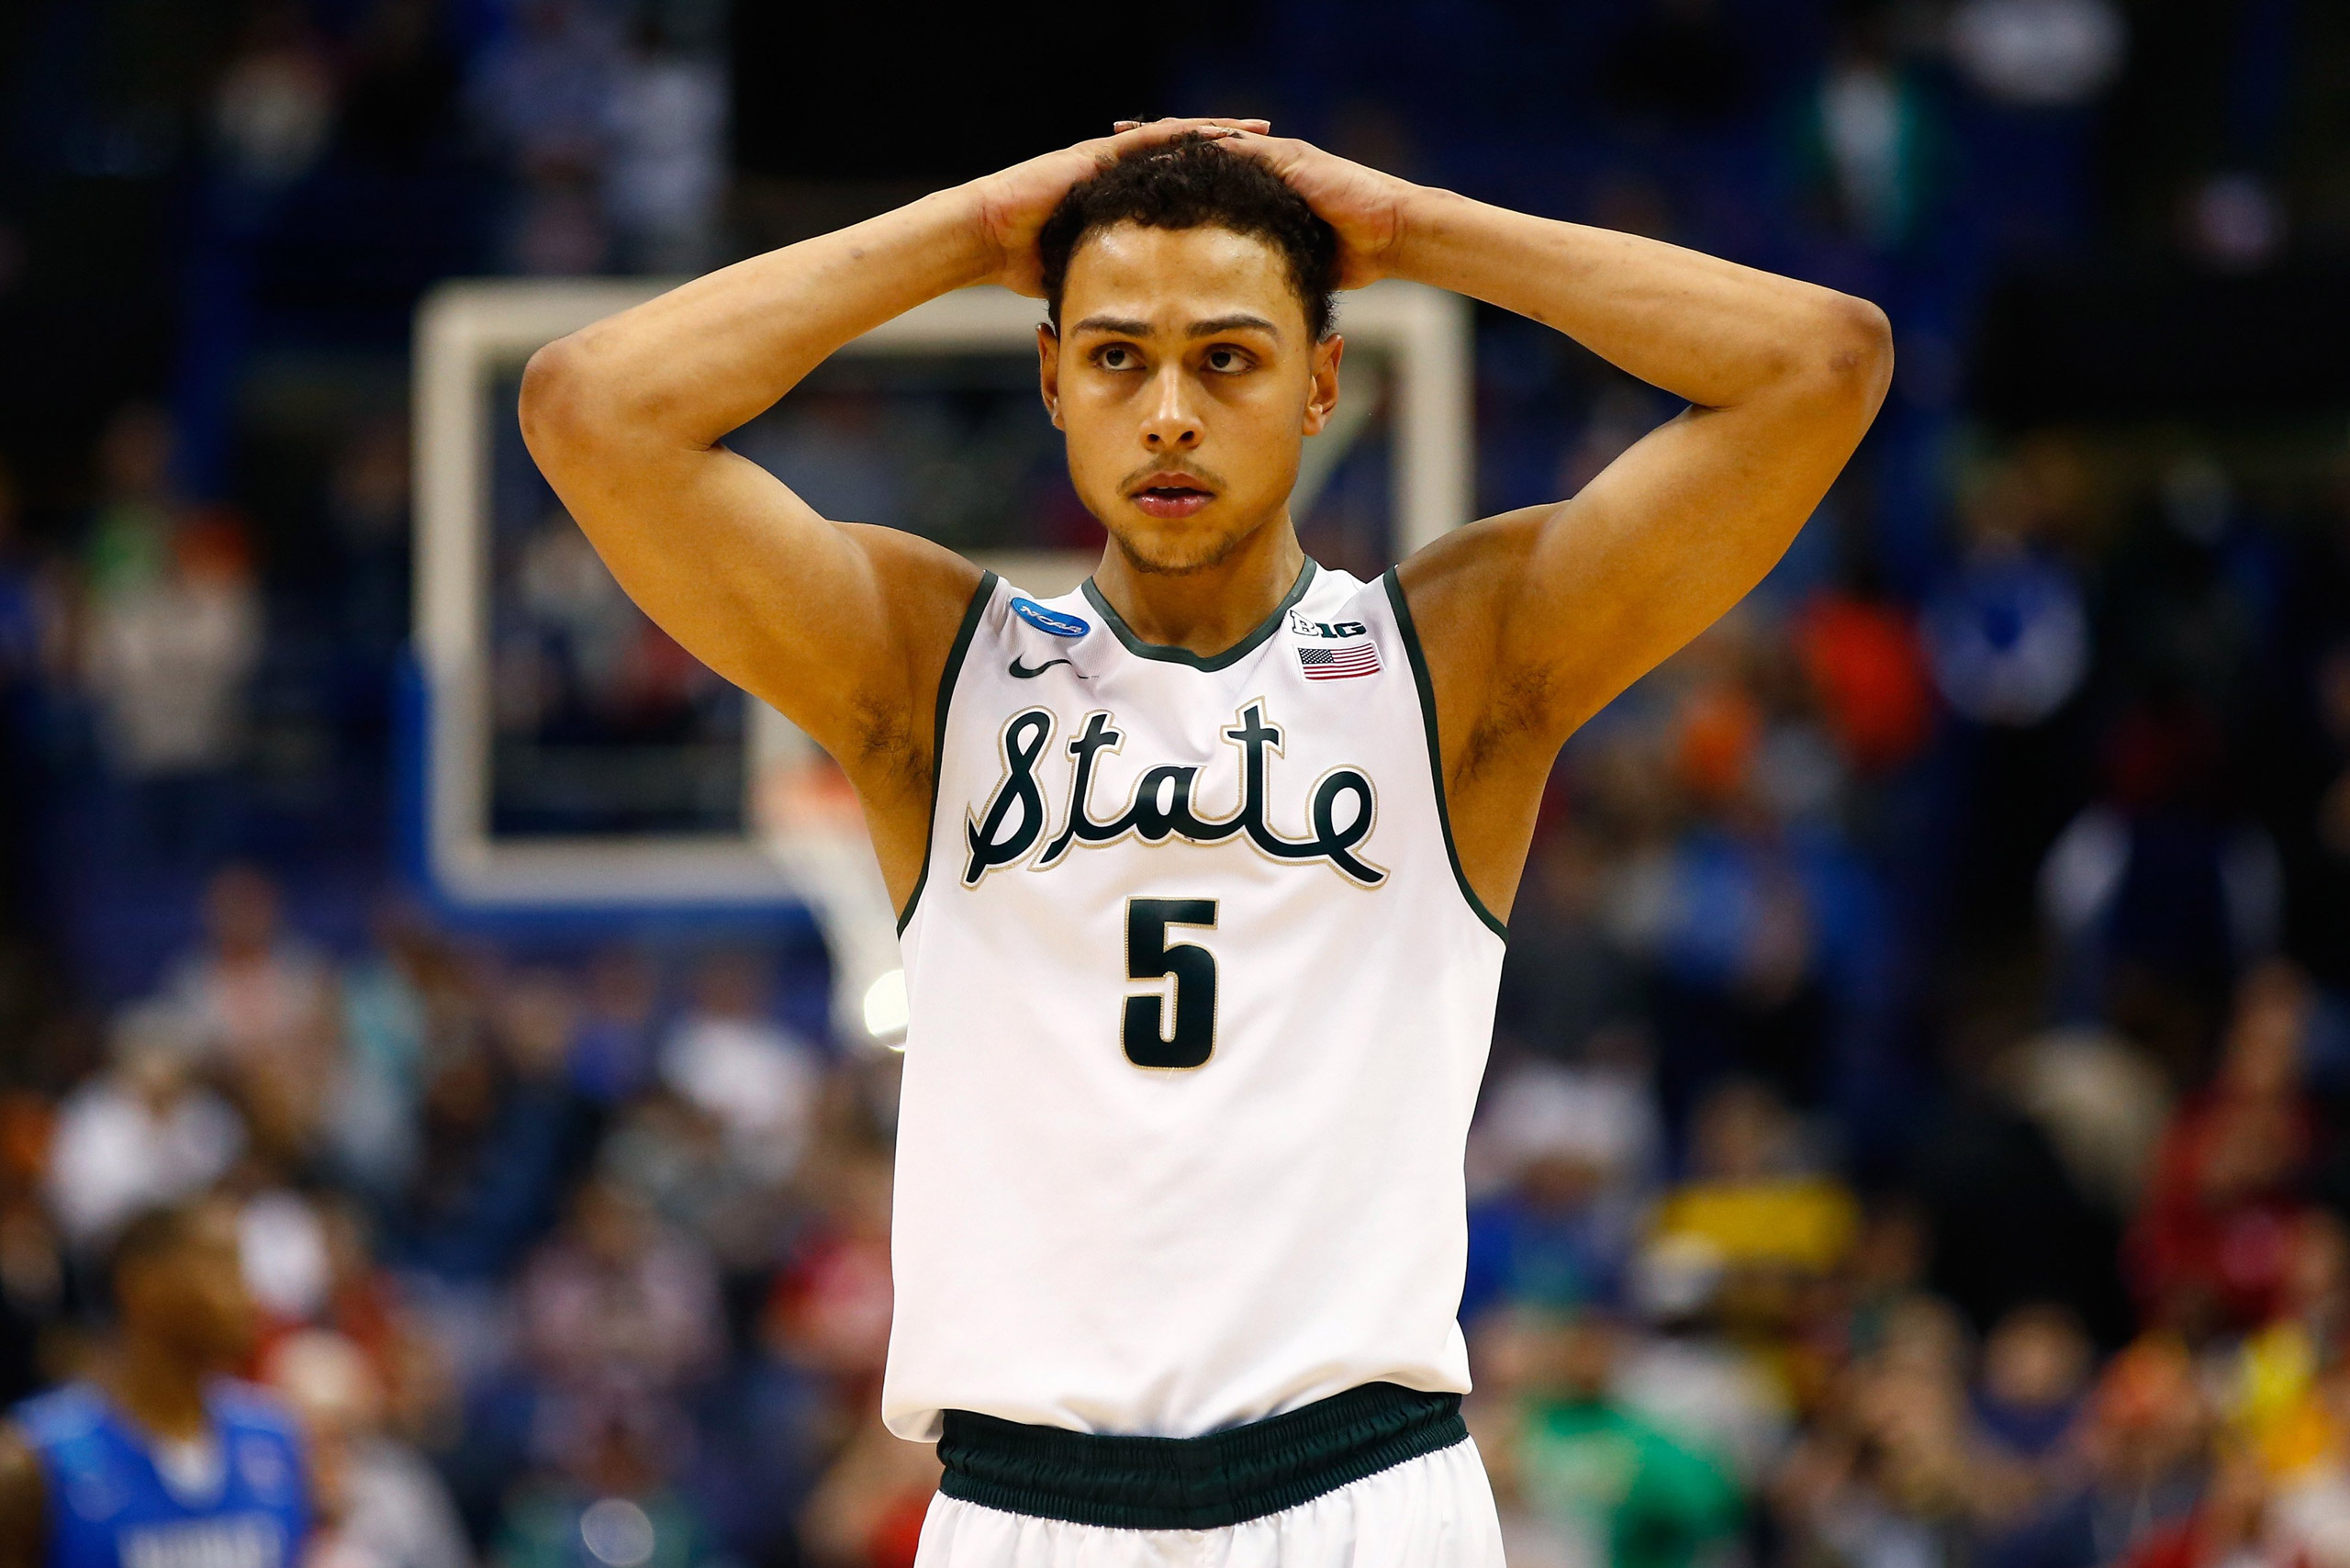 ST LOUIS, MO - MARCH 18: Bryn Forbes #5 of the Michigan State Spartans reacts late in the game against the Middle Tennessee Blue Raiders during the first round of the 2016 NCAA Men's Basketball Tournament at Scottrade Center on March 18, 2016 in St Louis, Missouri.  (Photo by Jamie Squire/Getty Images)